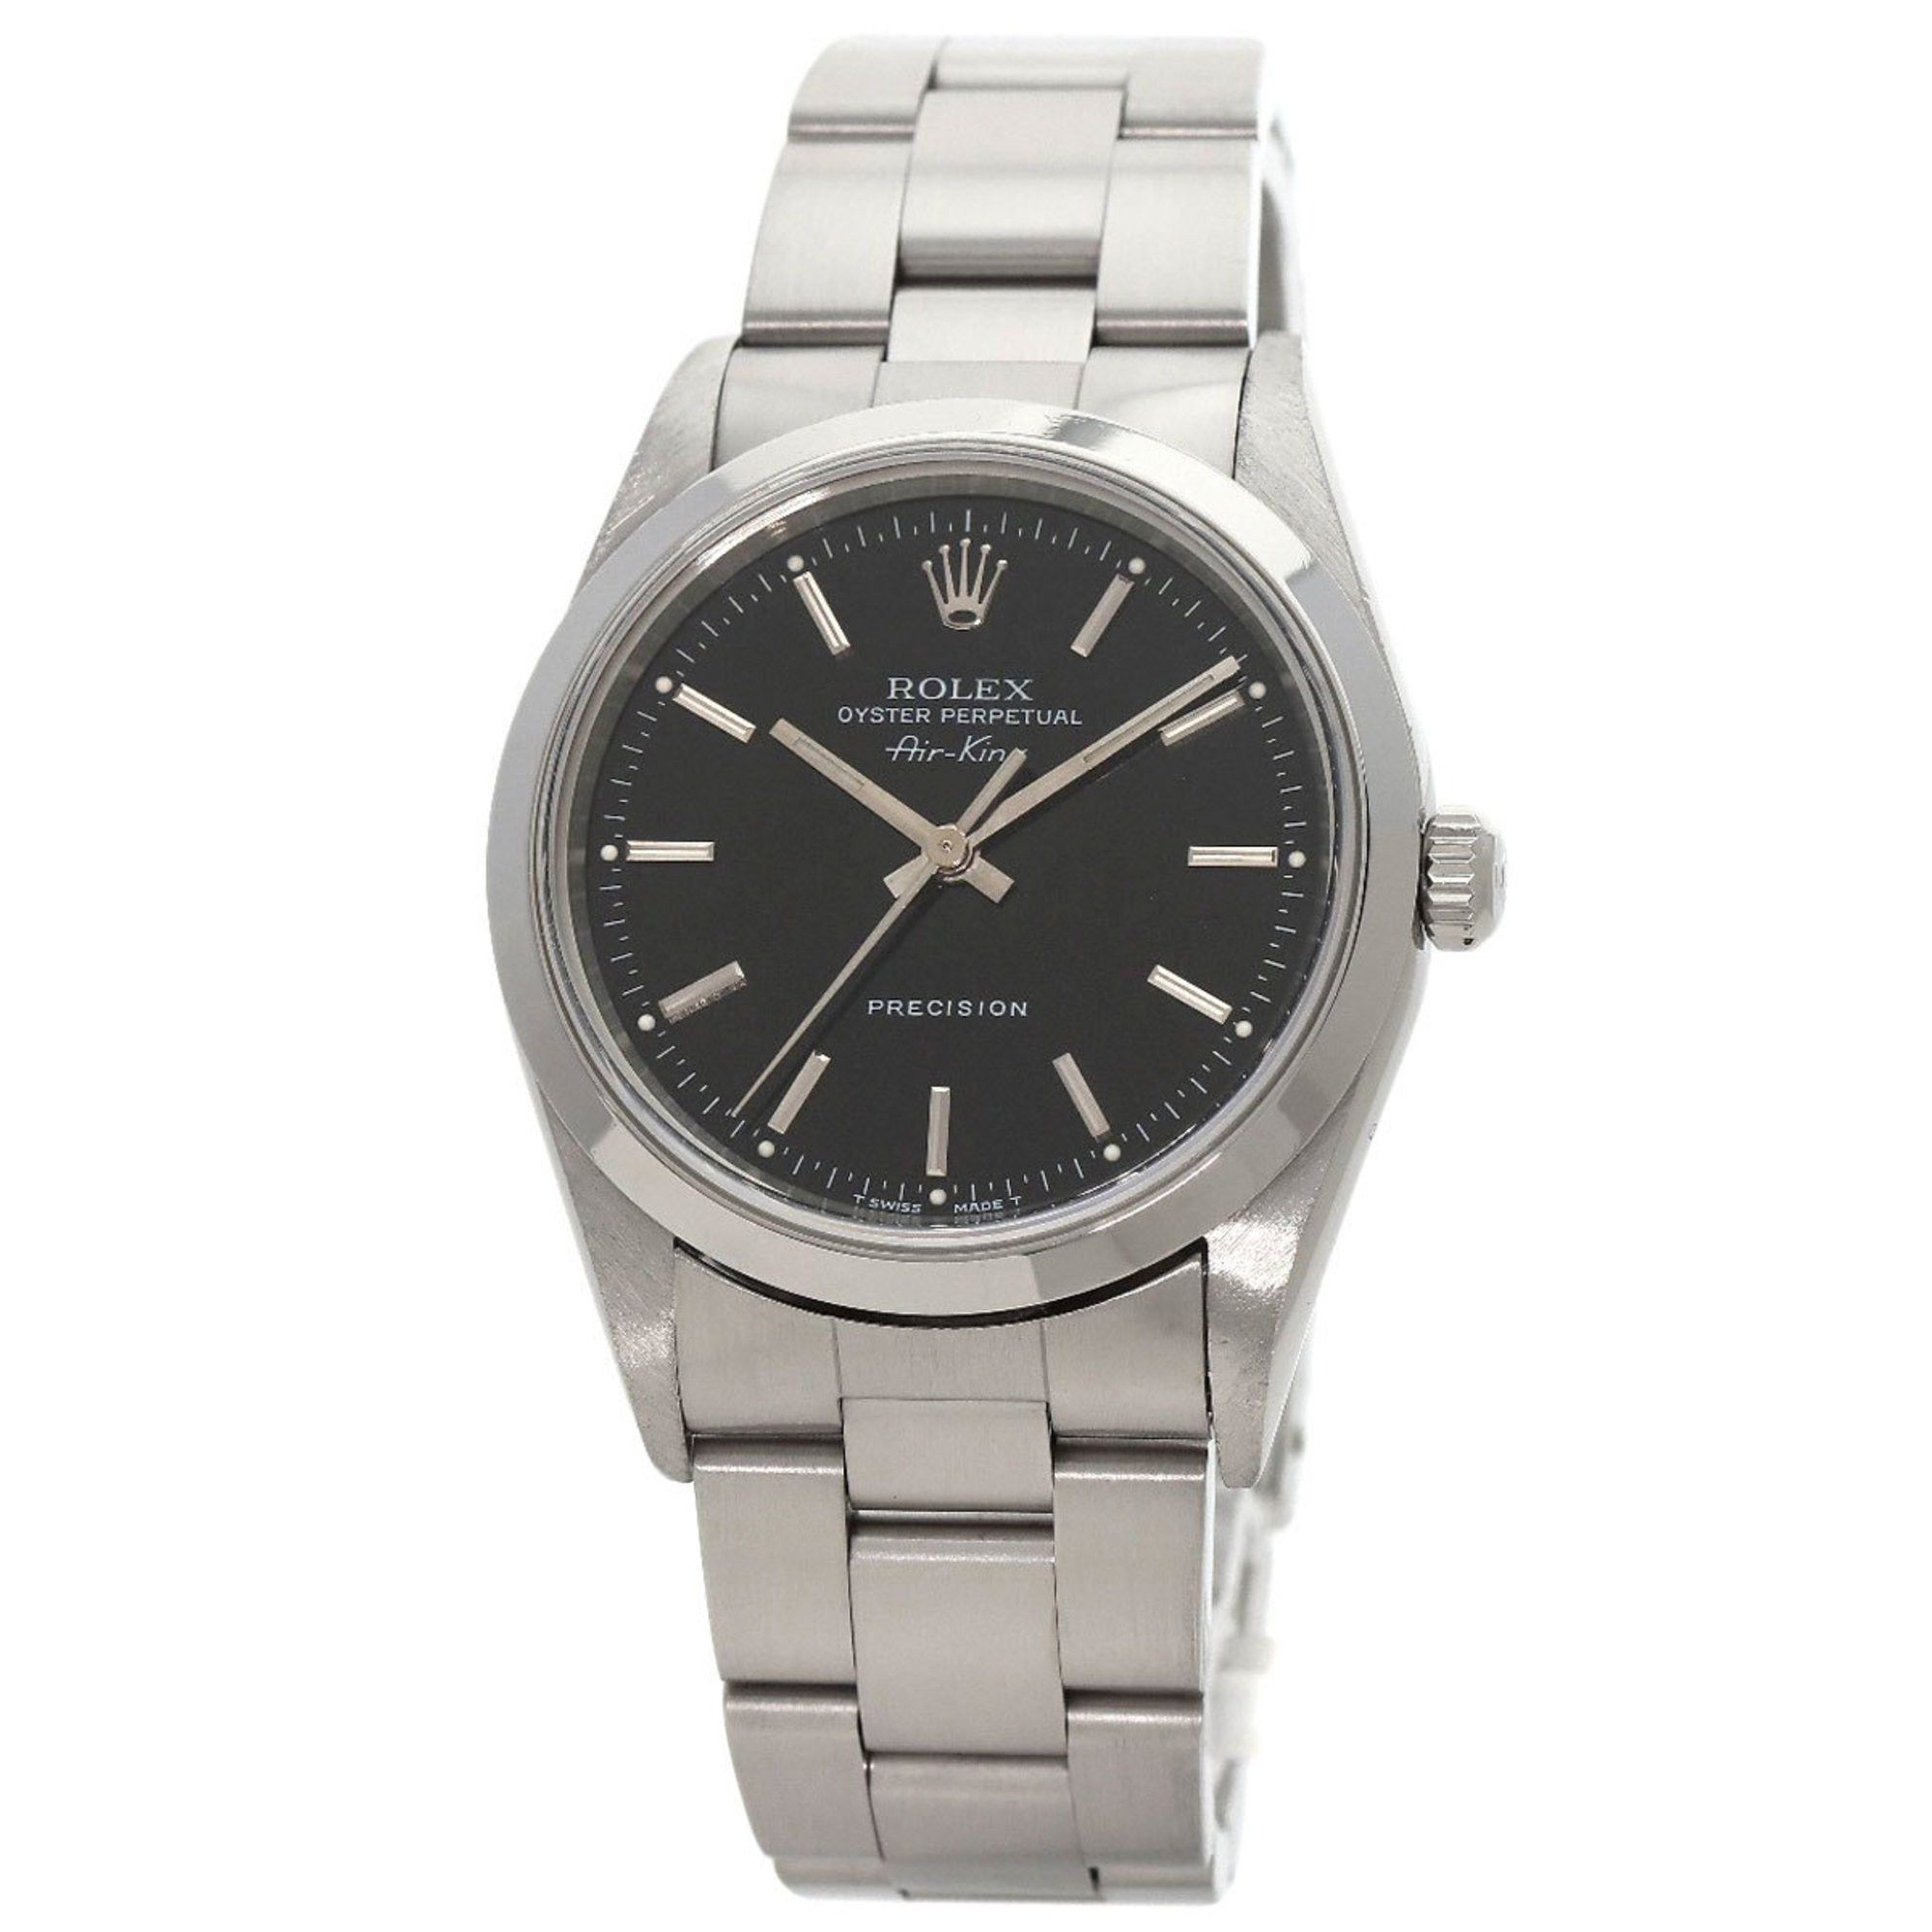 image of Rolex 14000 Air King Watch Stainless Steel Ss Men's Rolex in Black